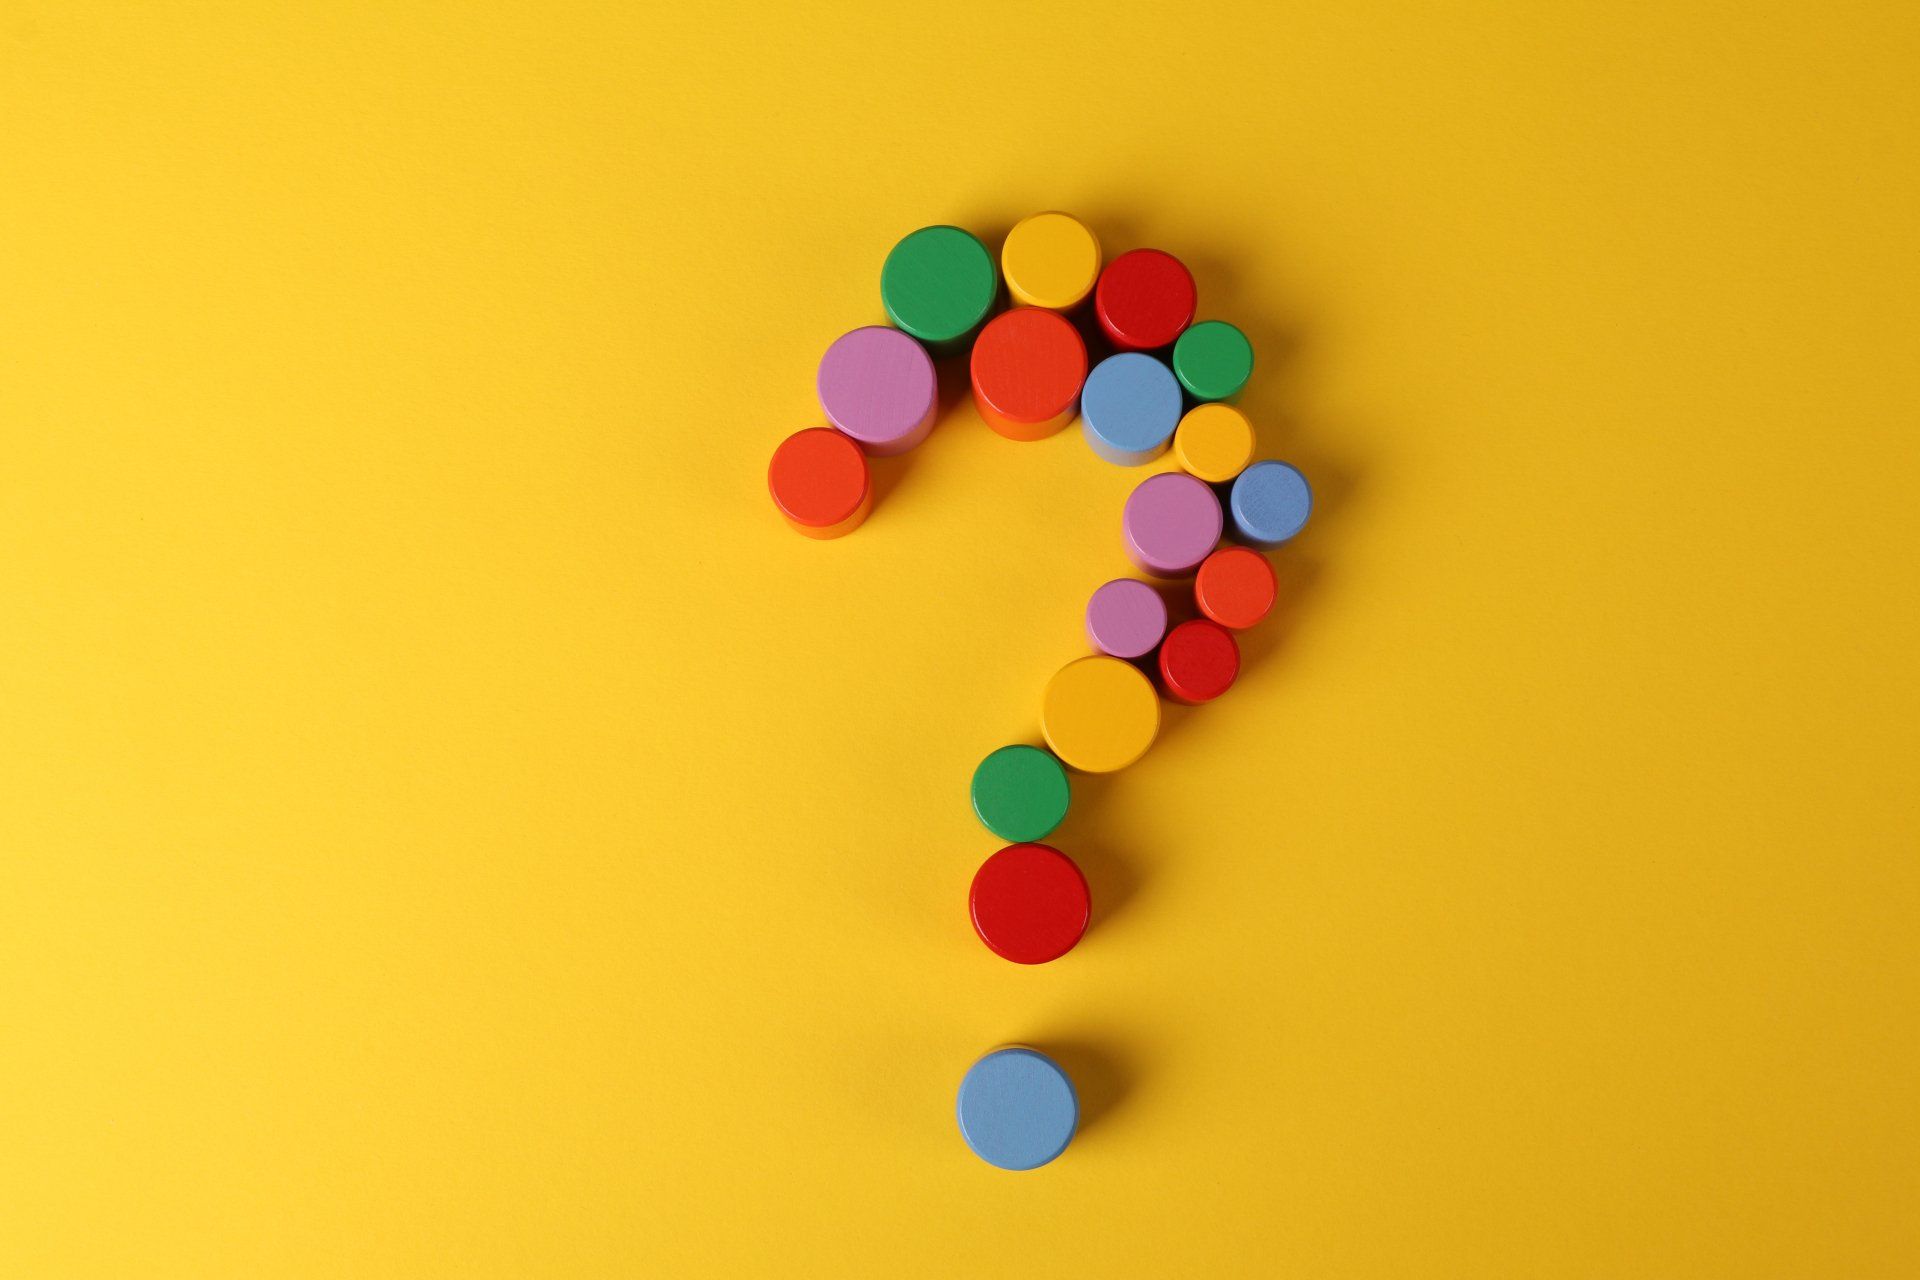 a question mark made of colorful circles on a gold background.